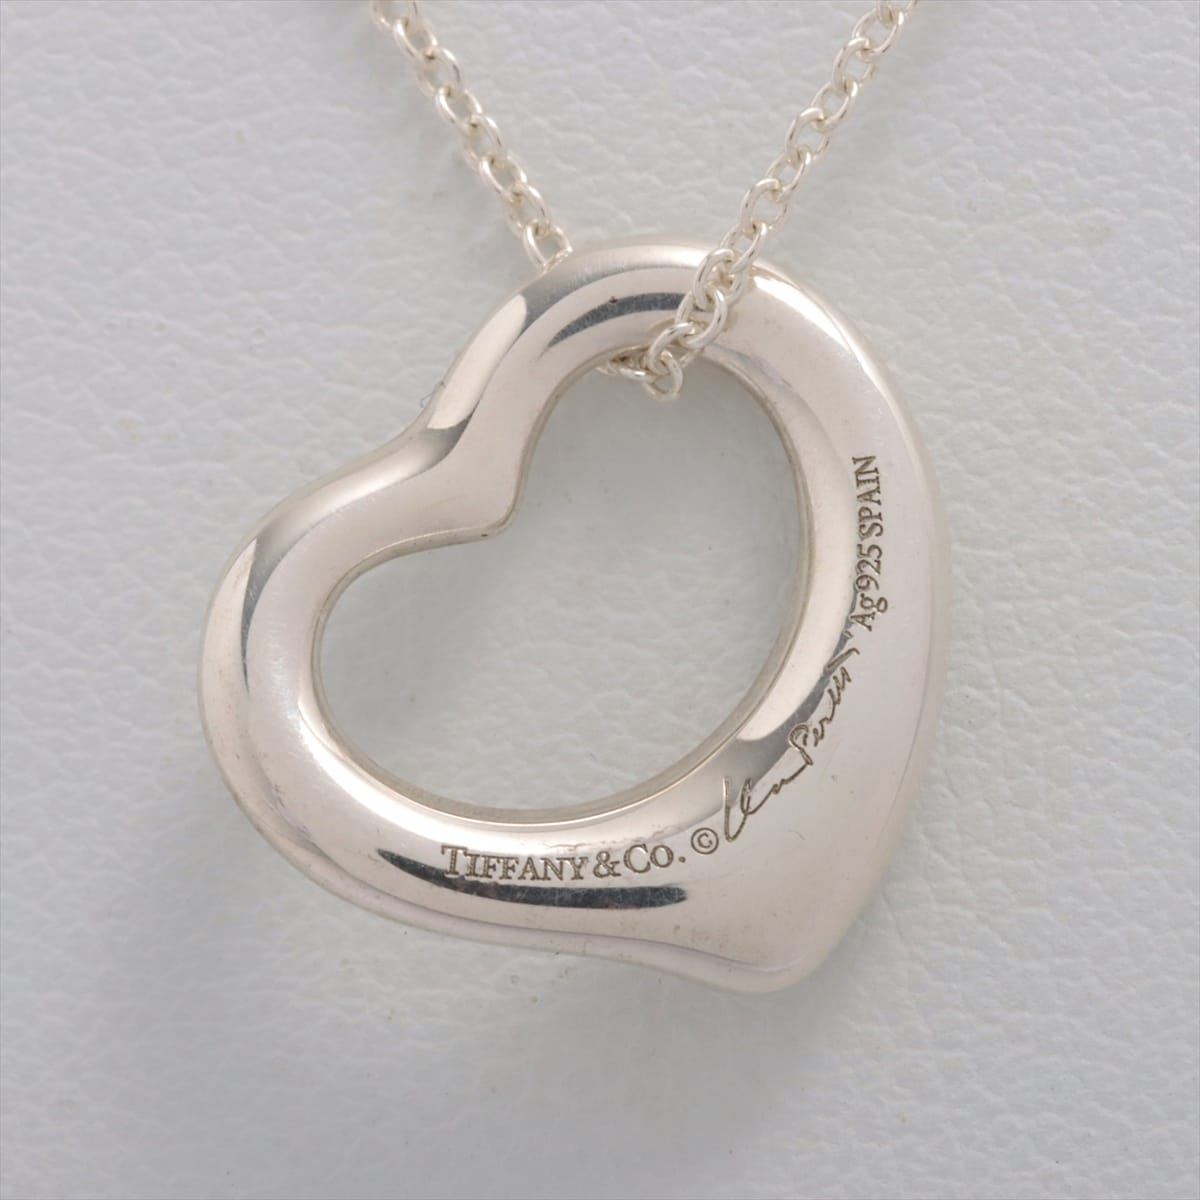 Tiffany Open Heart Necklace 925 3.3g Silver